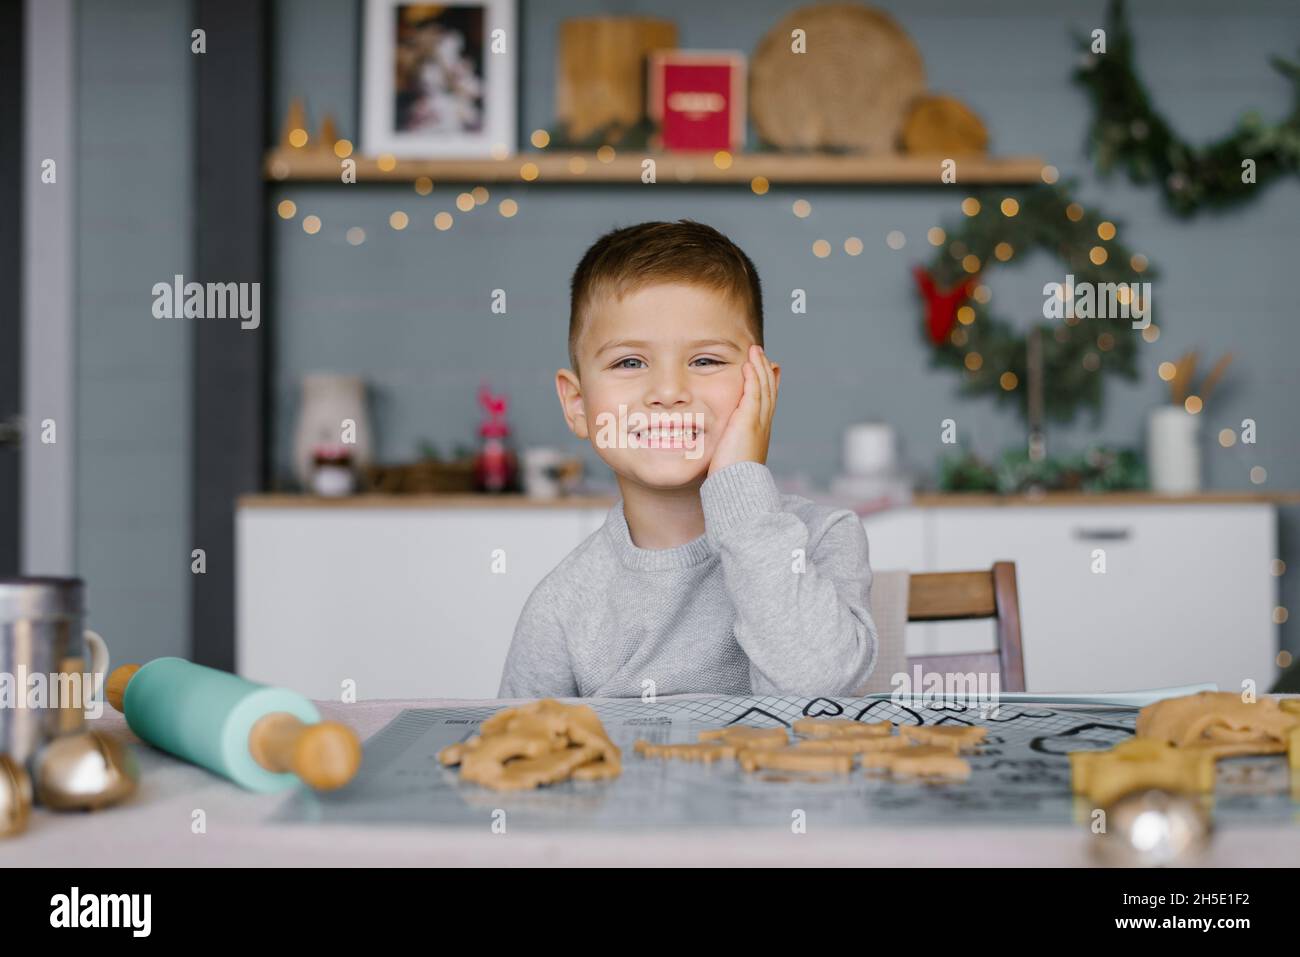 A cute little boy of 3-4 years old is sitting at the table and preparing Christmas cookies. Family vacation at home during the holidays. New Year and Stock Photo